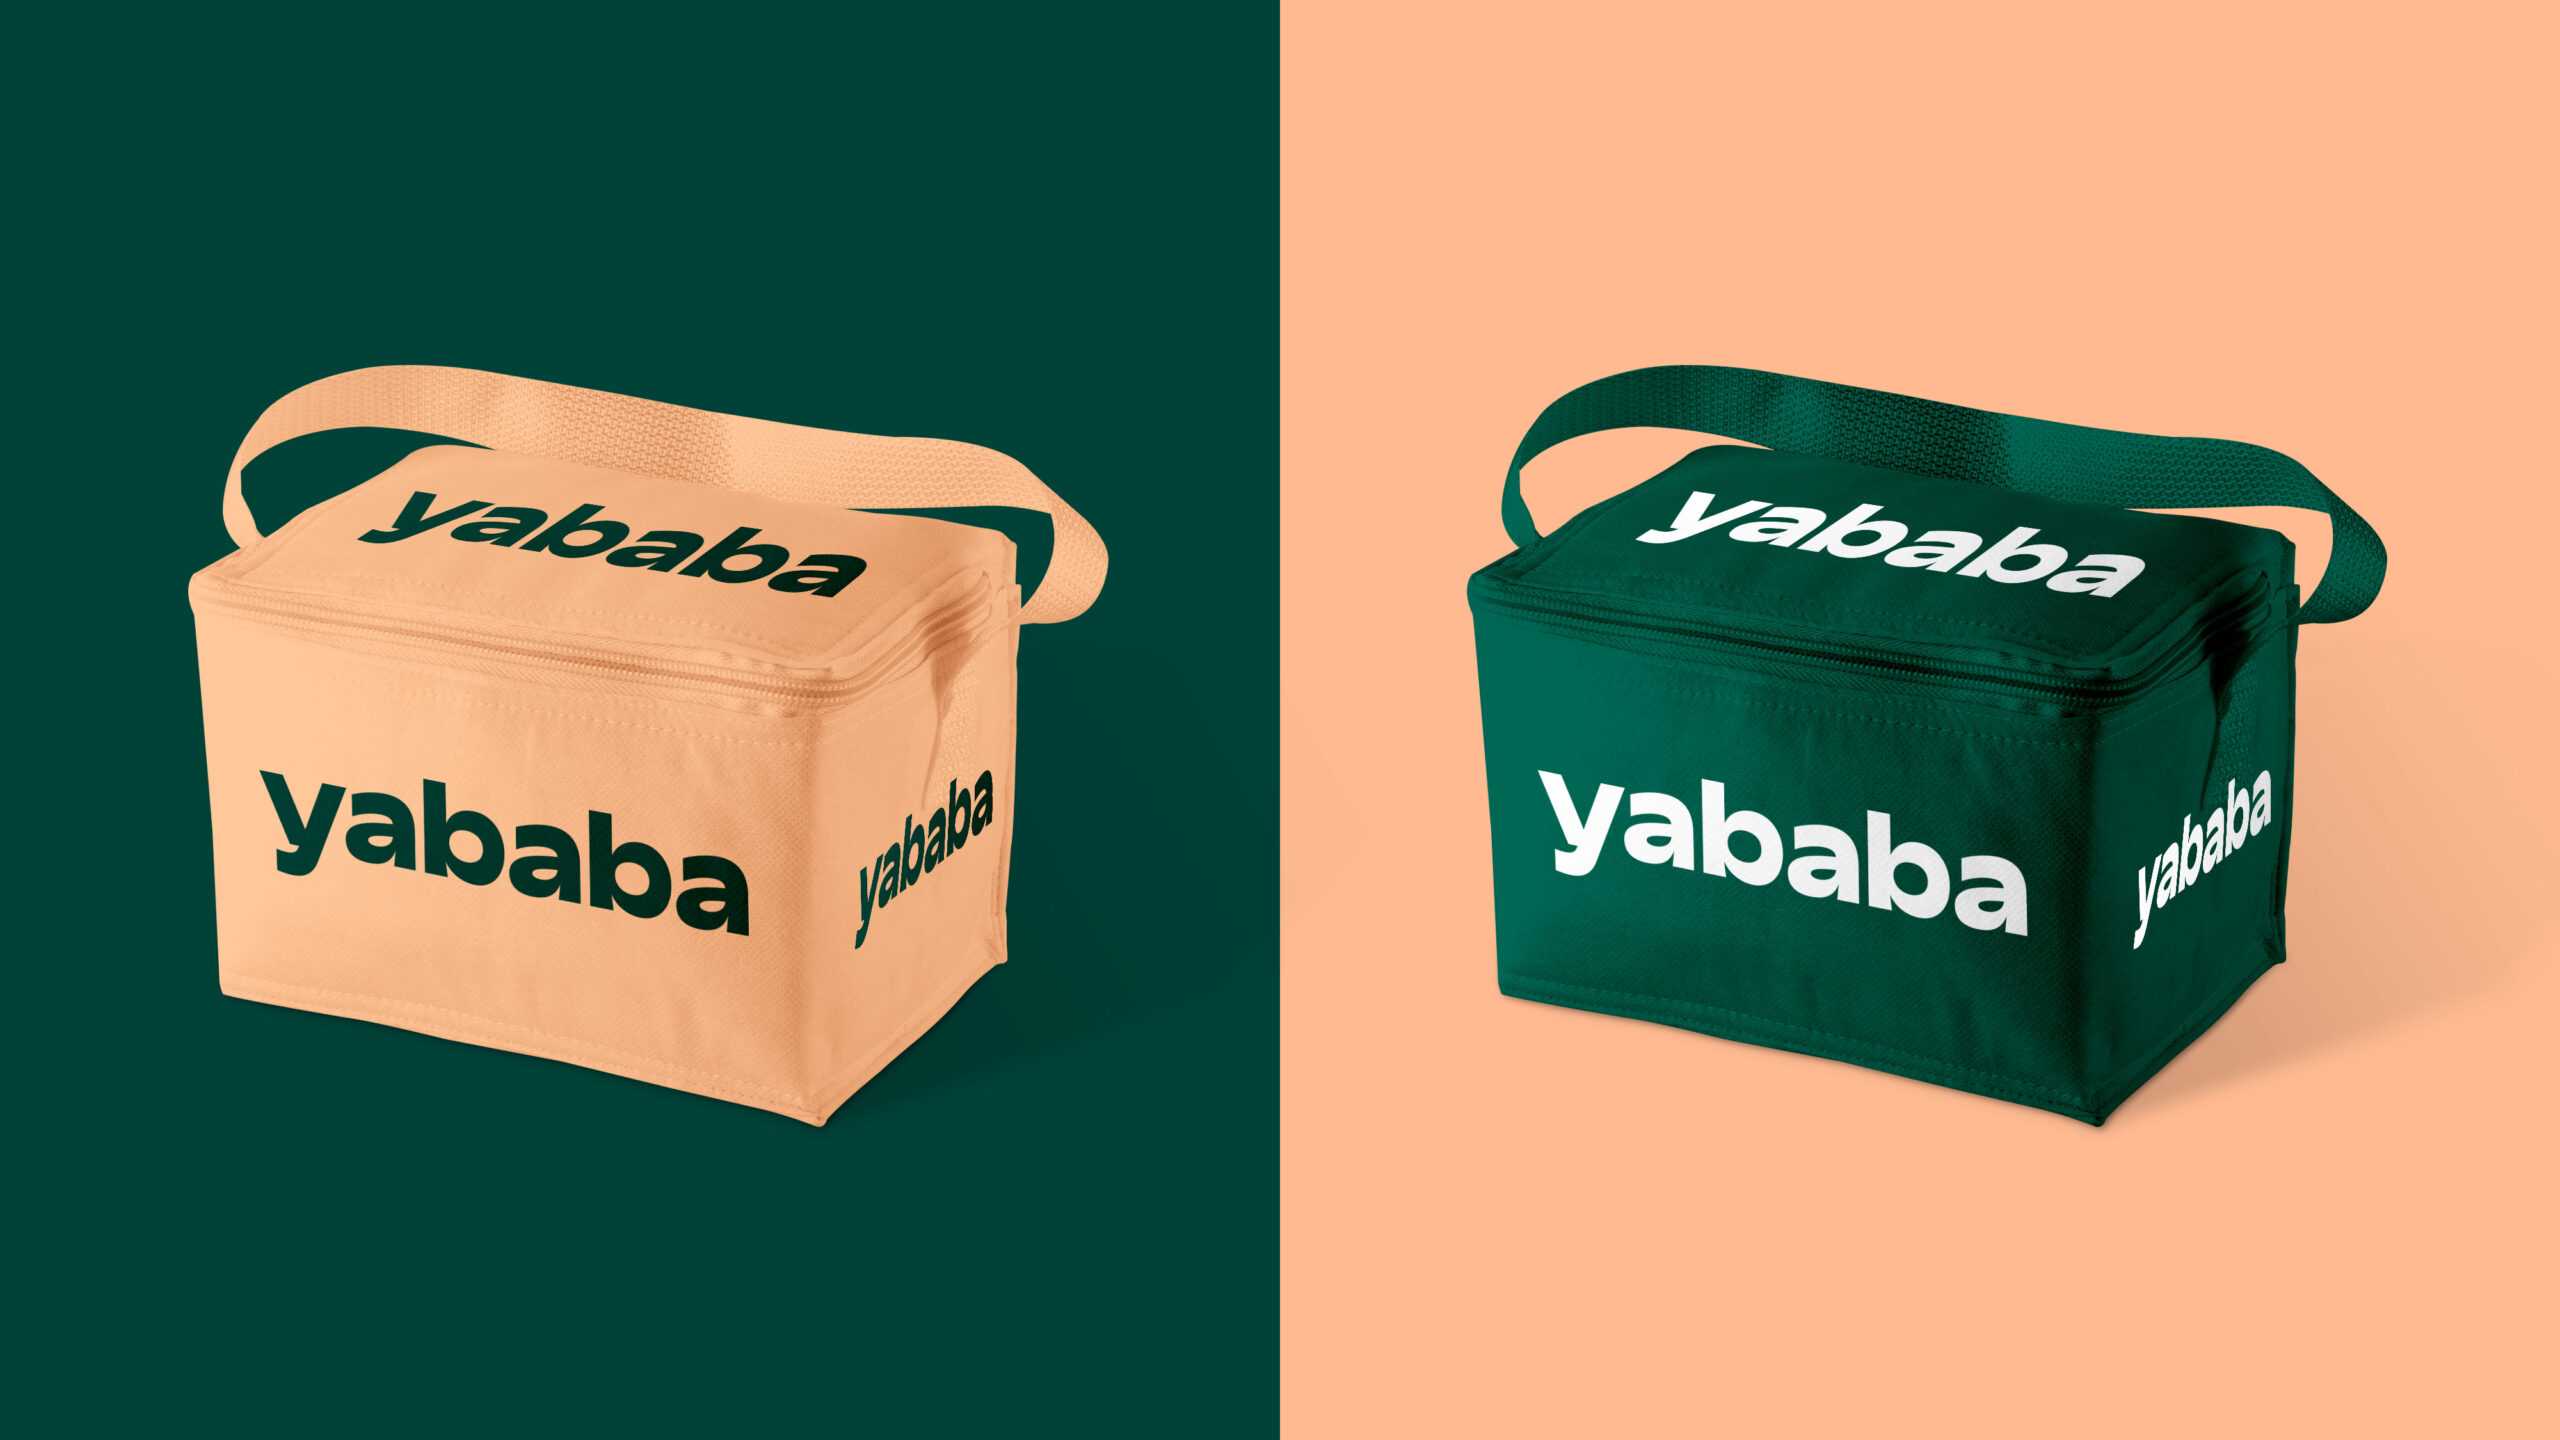 mockup of Yababa delivering bags